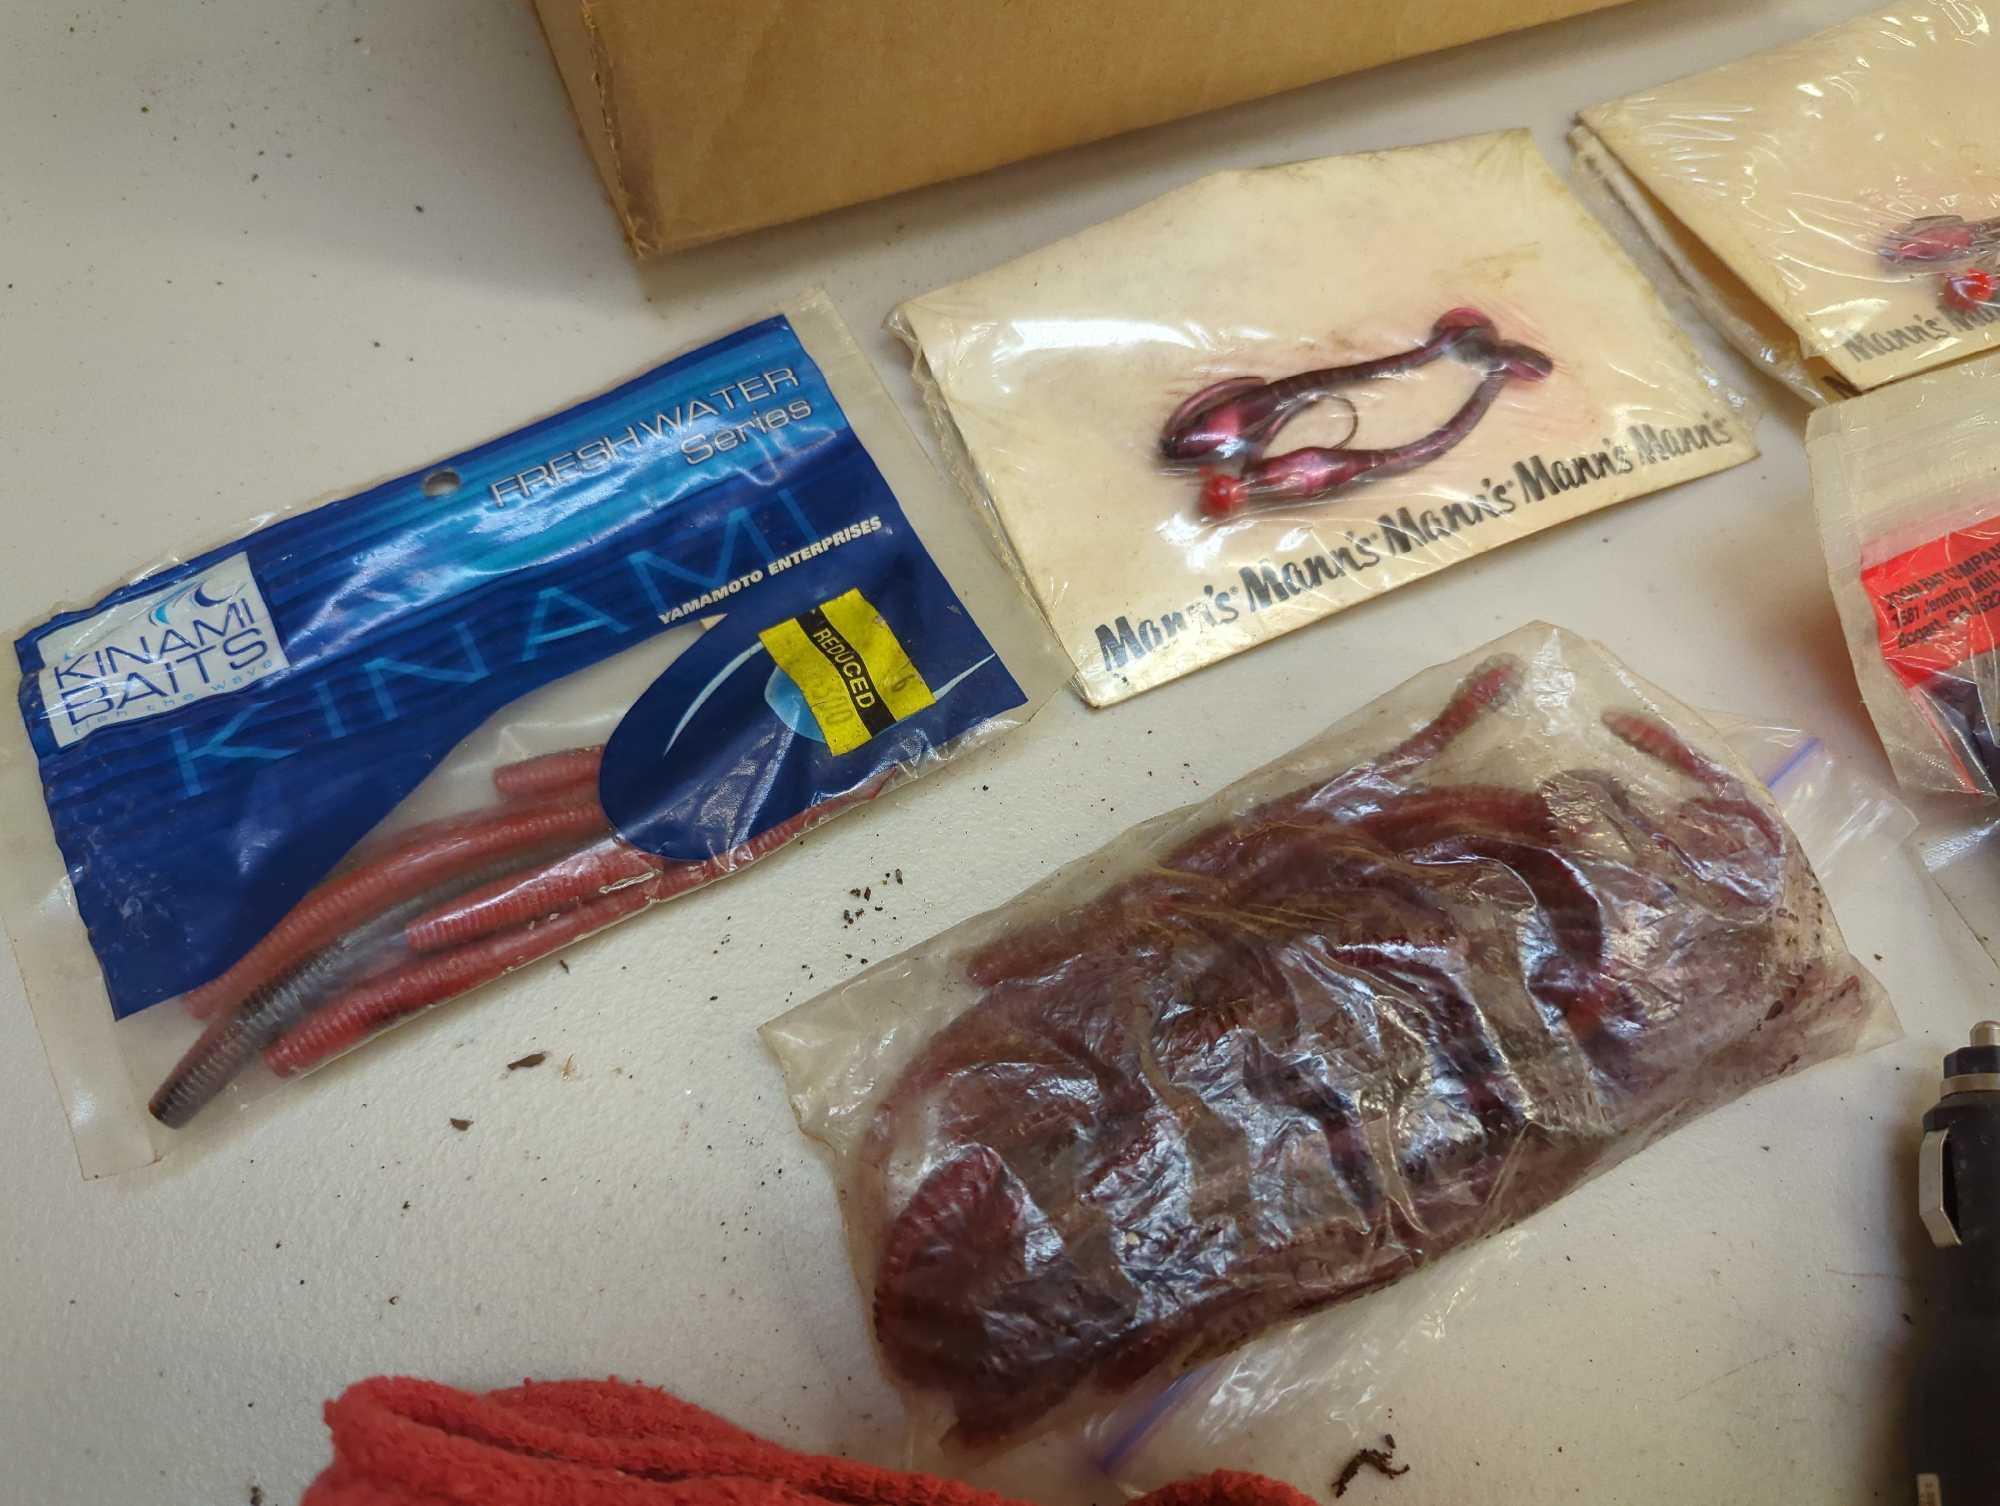 Box of fishing lures, rags, and other fishing gear. Comes as is shown in photos. Appears to be used.